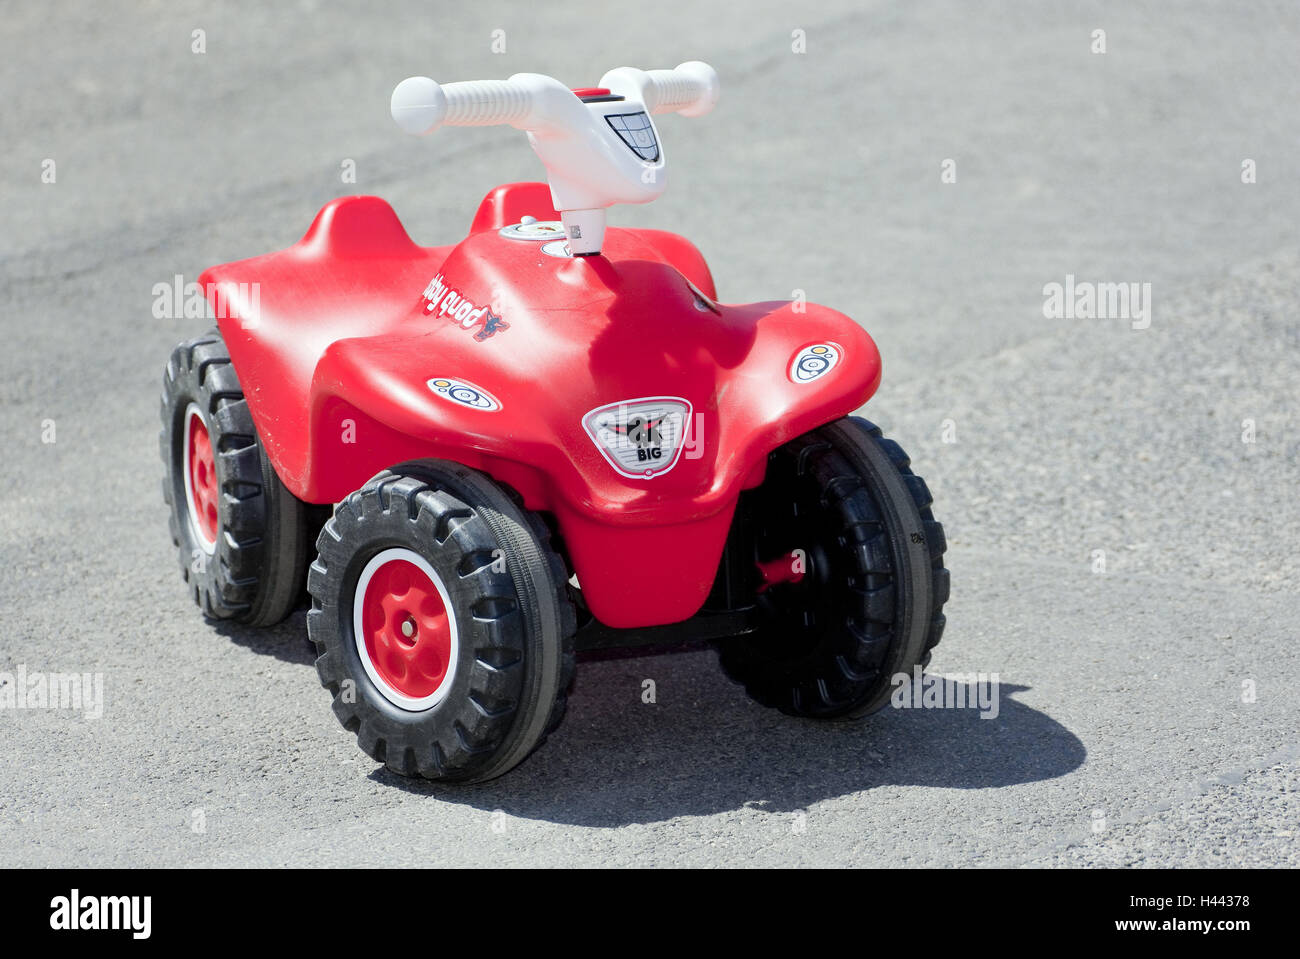 Bobbyquad, no property release, Bobby's coach, form, Quad, car, red, toys, toys car, street, toys, cross-country vehicle, outside, deserted, Stock Photo